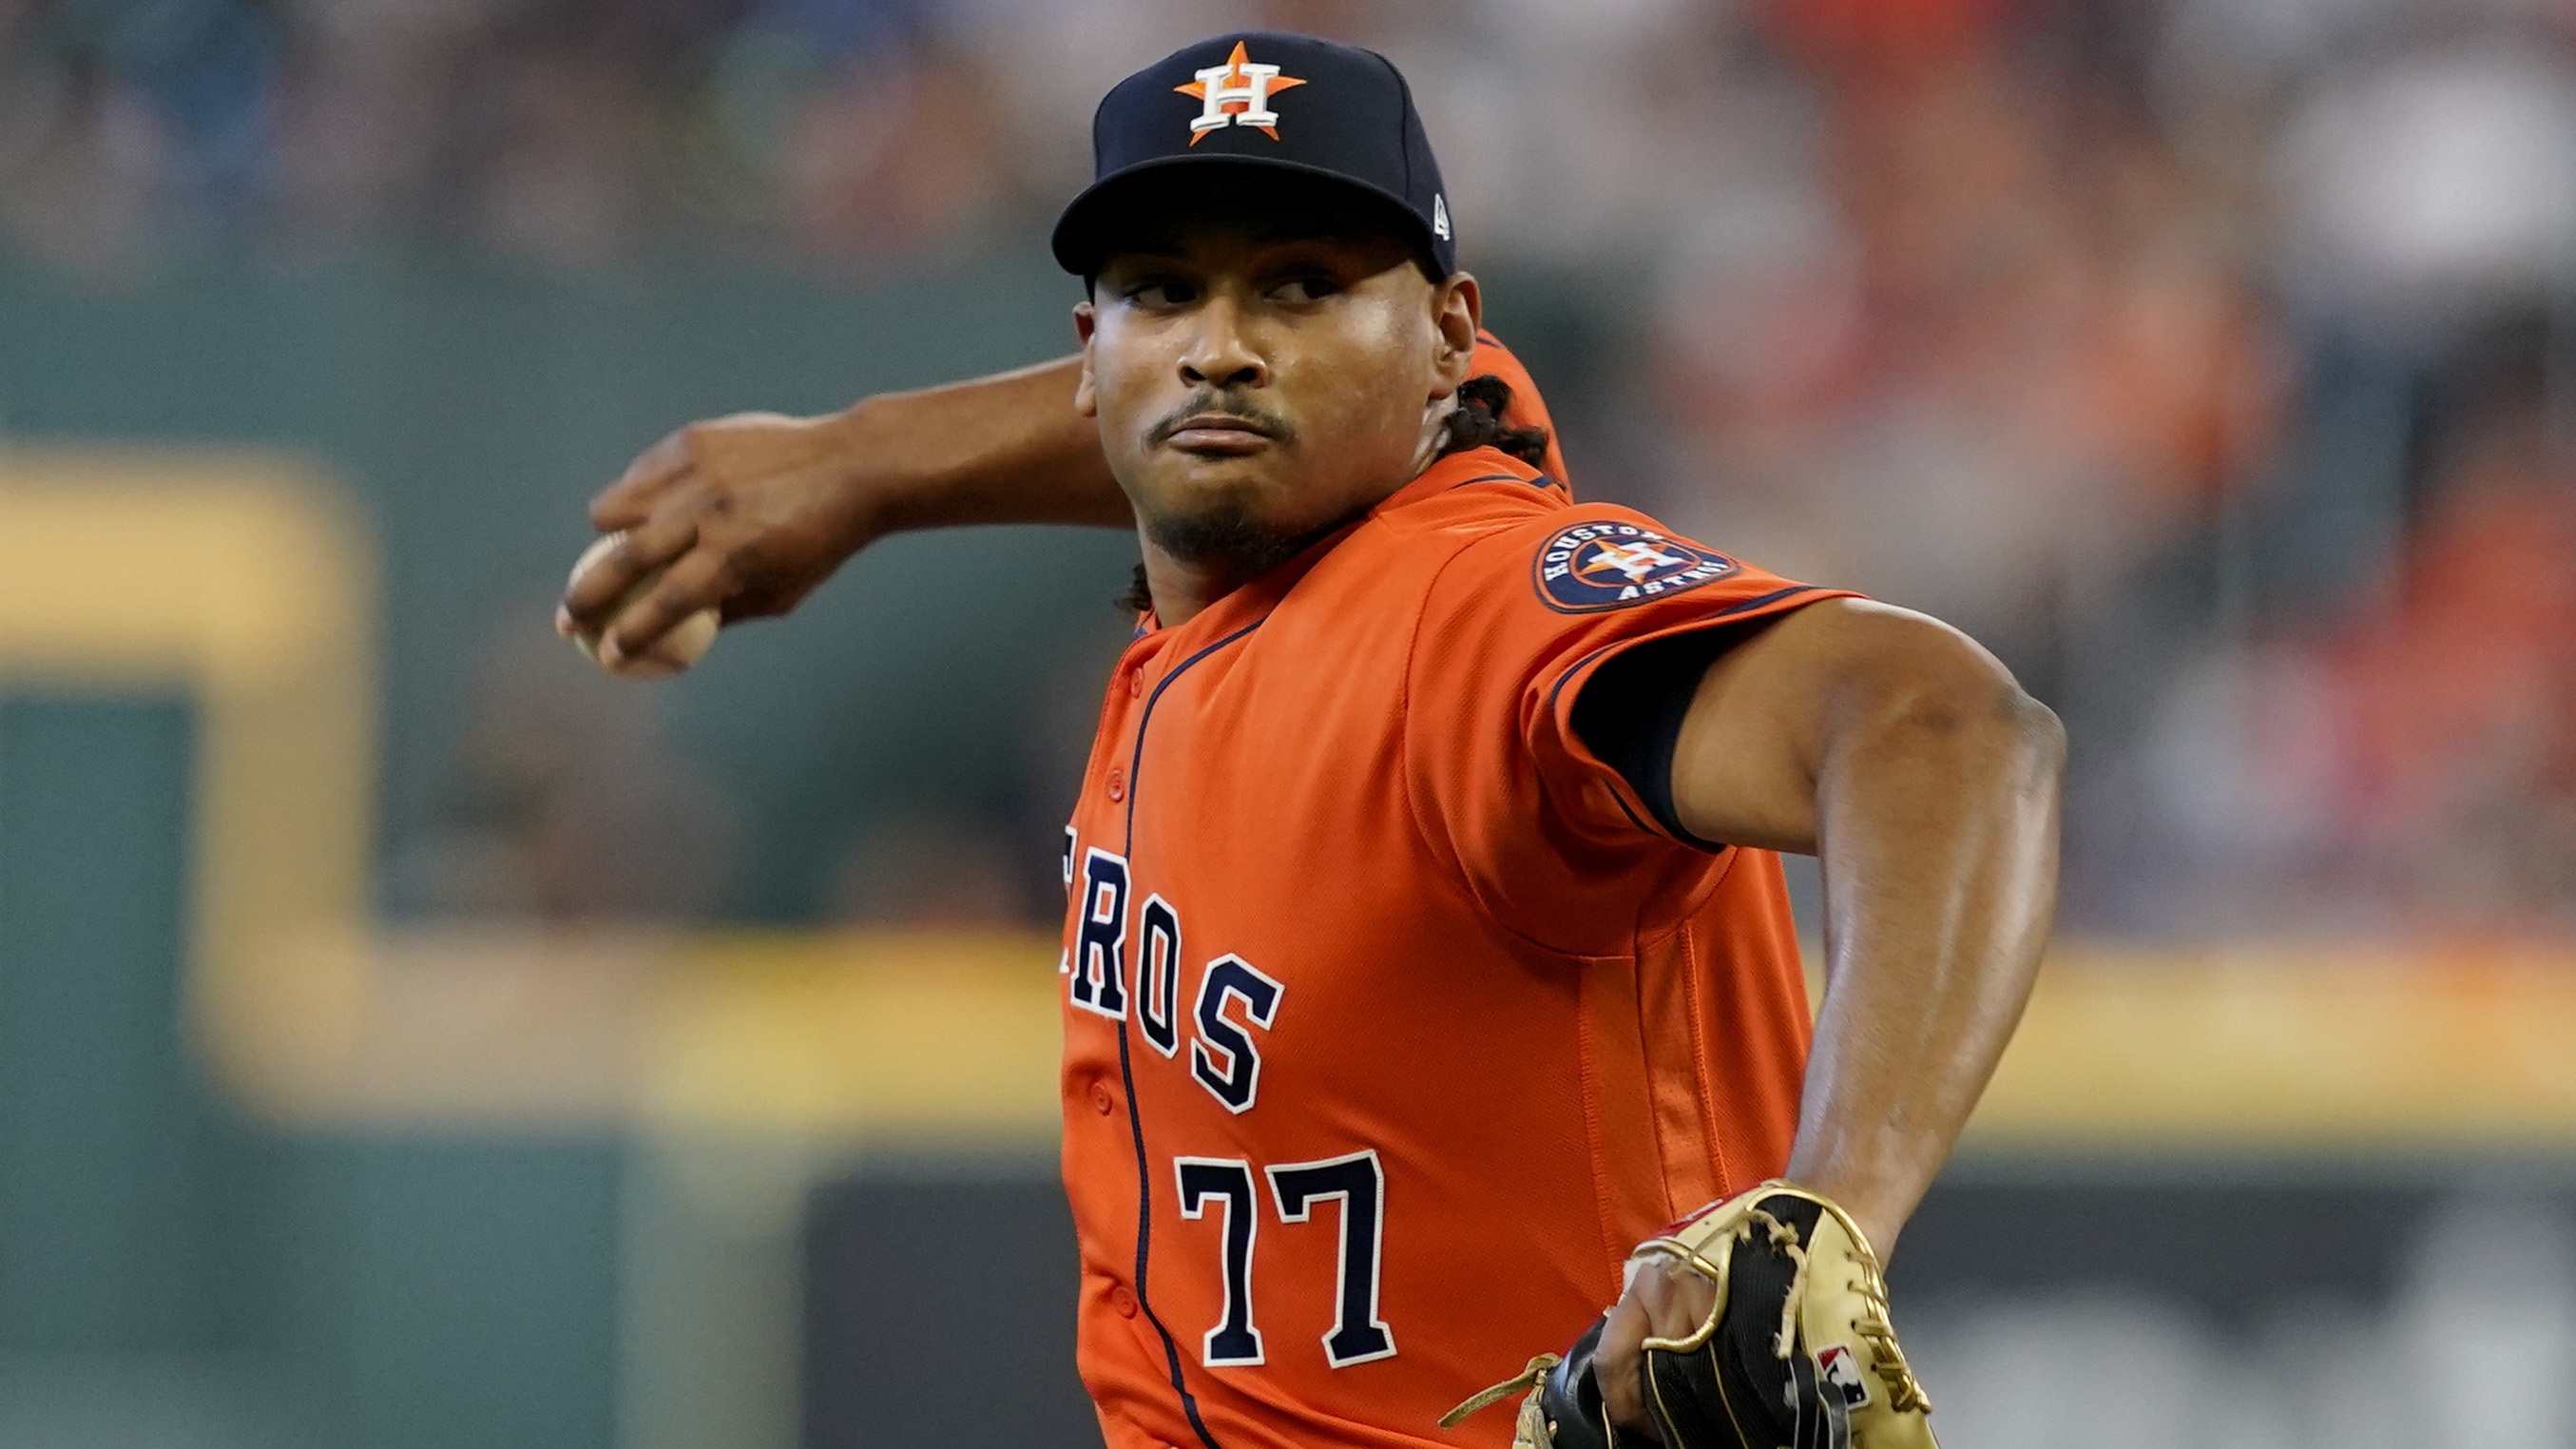 Houston Astros ace Lance McCullers, Jr. opens up about his